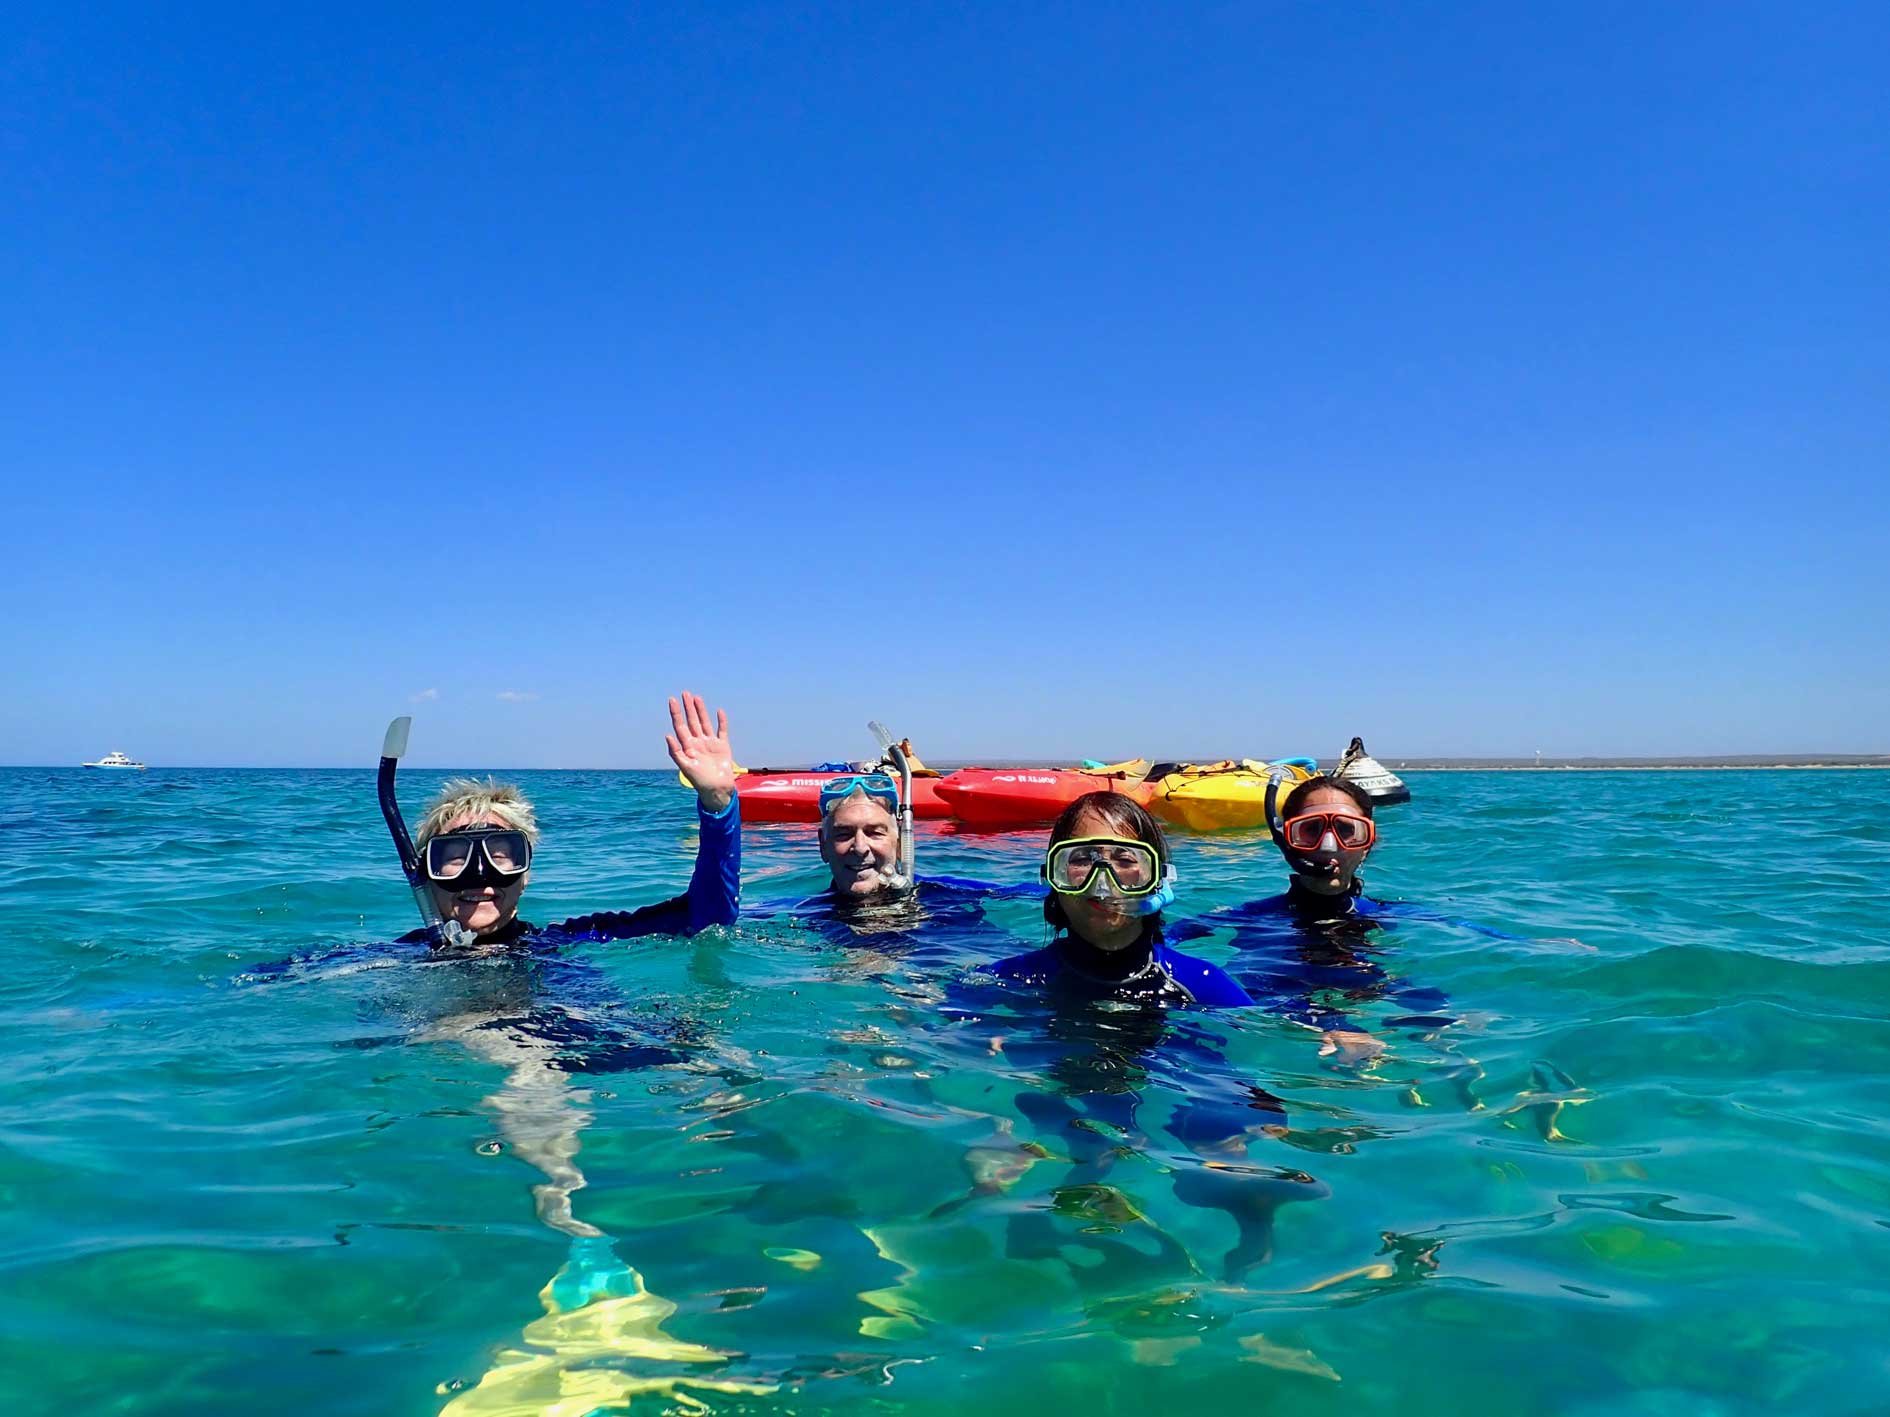 Snorkellers in the water with kayaks behind them on sea kayak and snorkel tour Turtle Tour at Ningaloo Reef, Exmouth, Western Australia